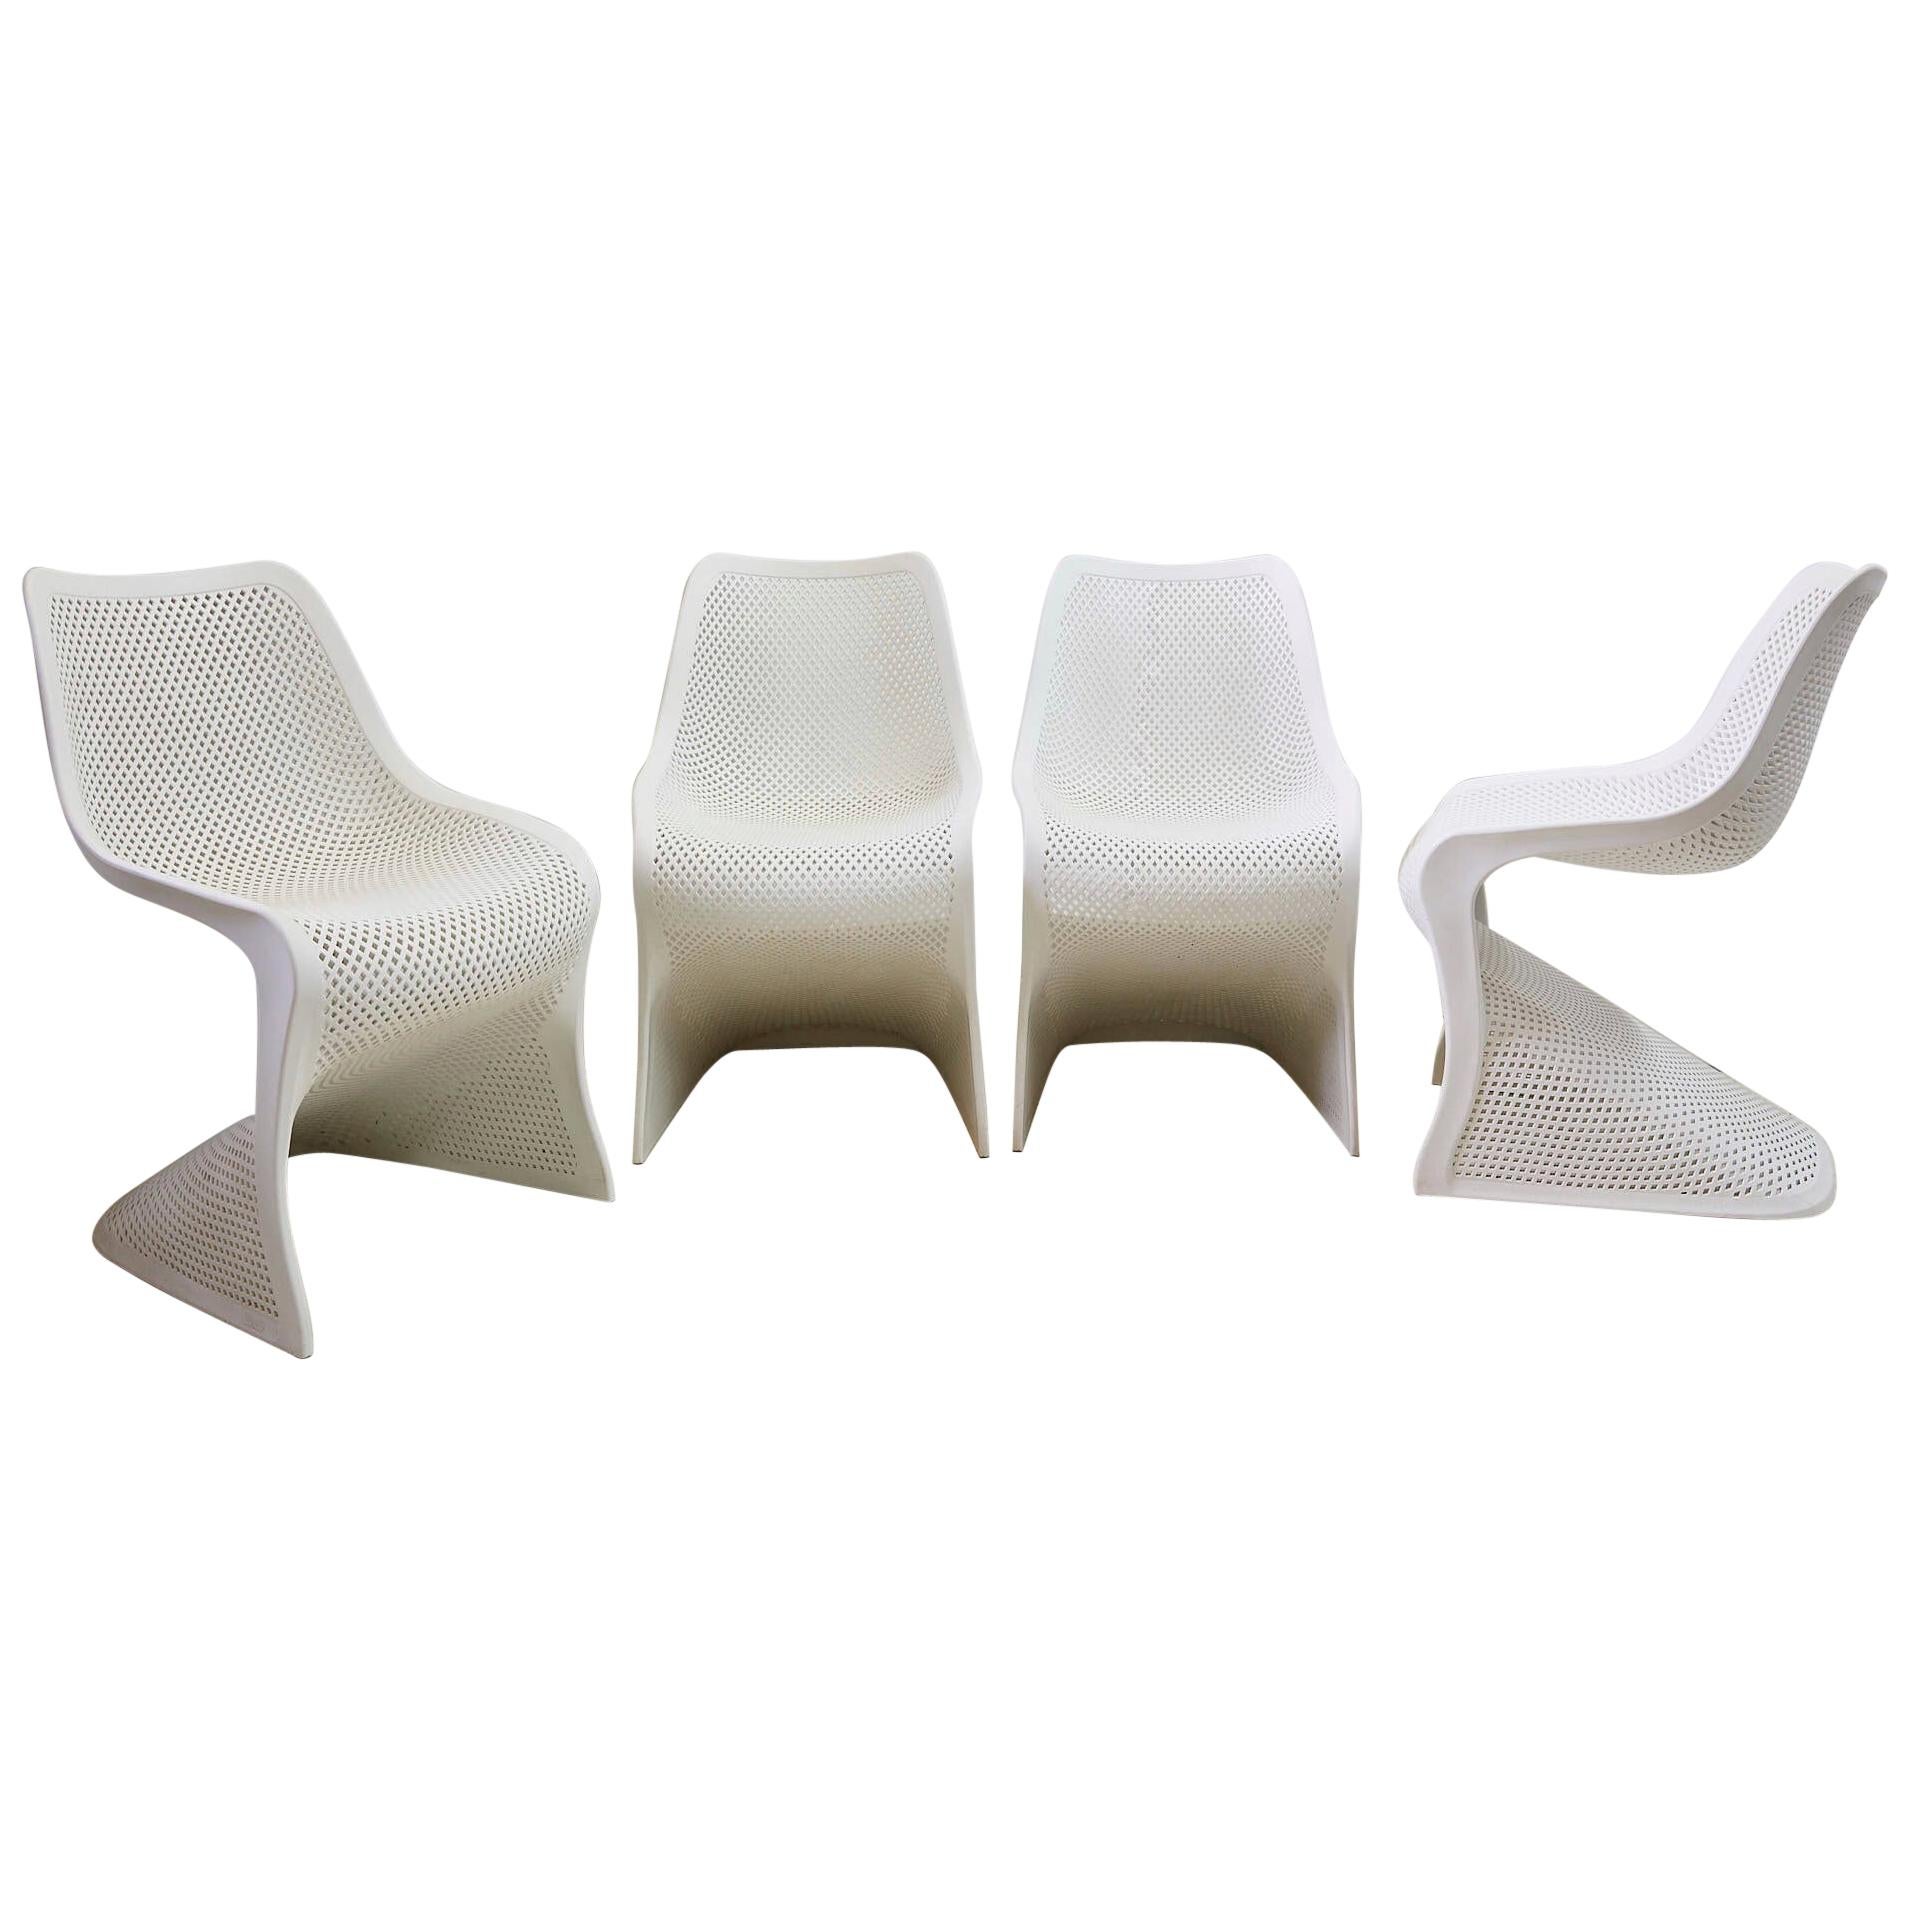 Modern Indoor/Outdoor Cantilever Chairs by Compamia, Set of 4